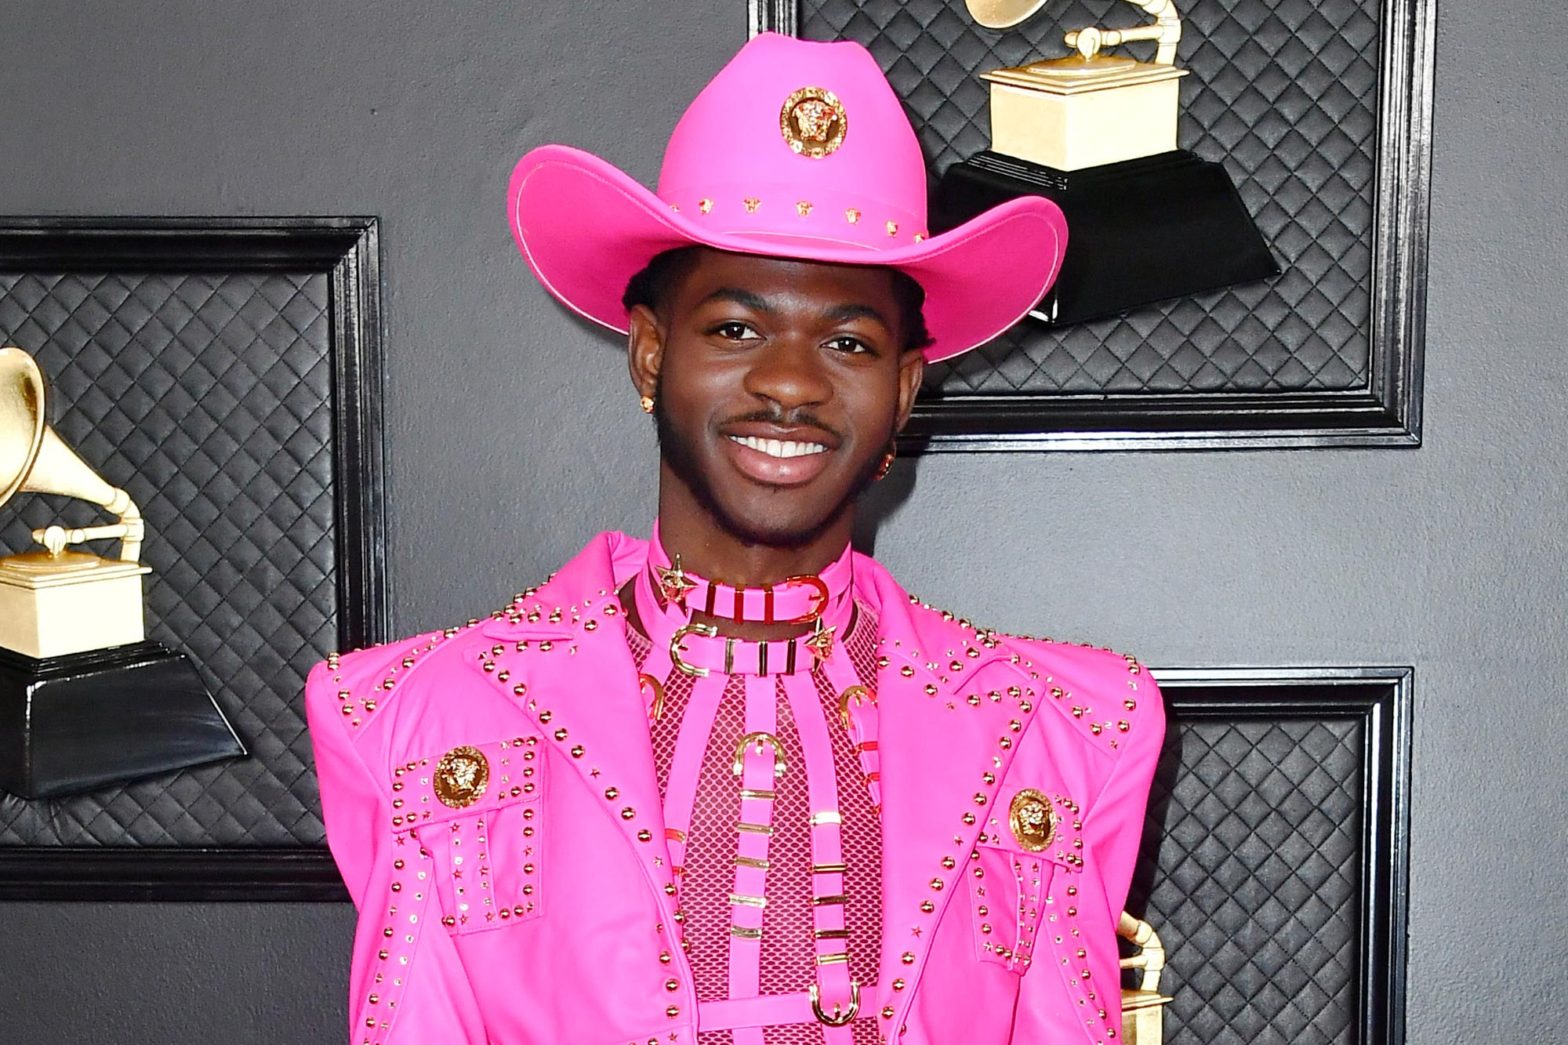 Image of Lil Nas X the rapper at the Grammy's wearing pink leather cowboy clothes